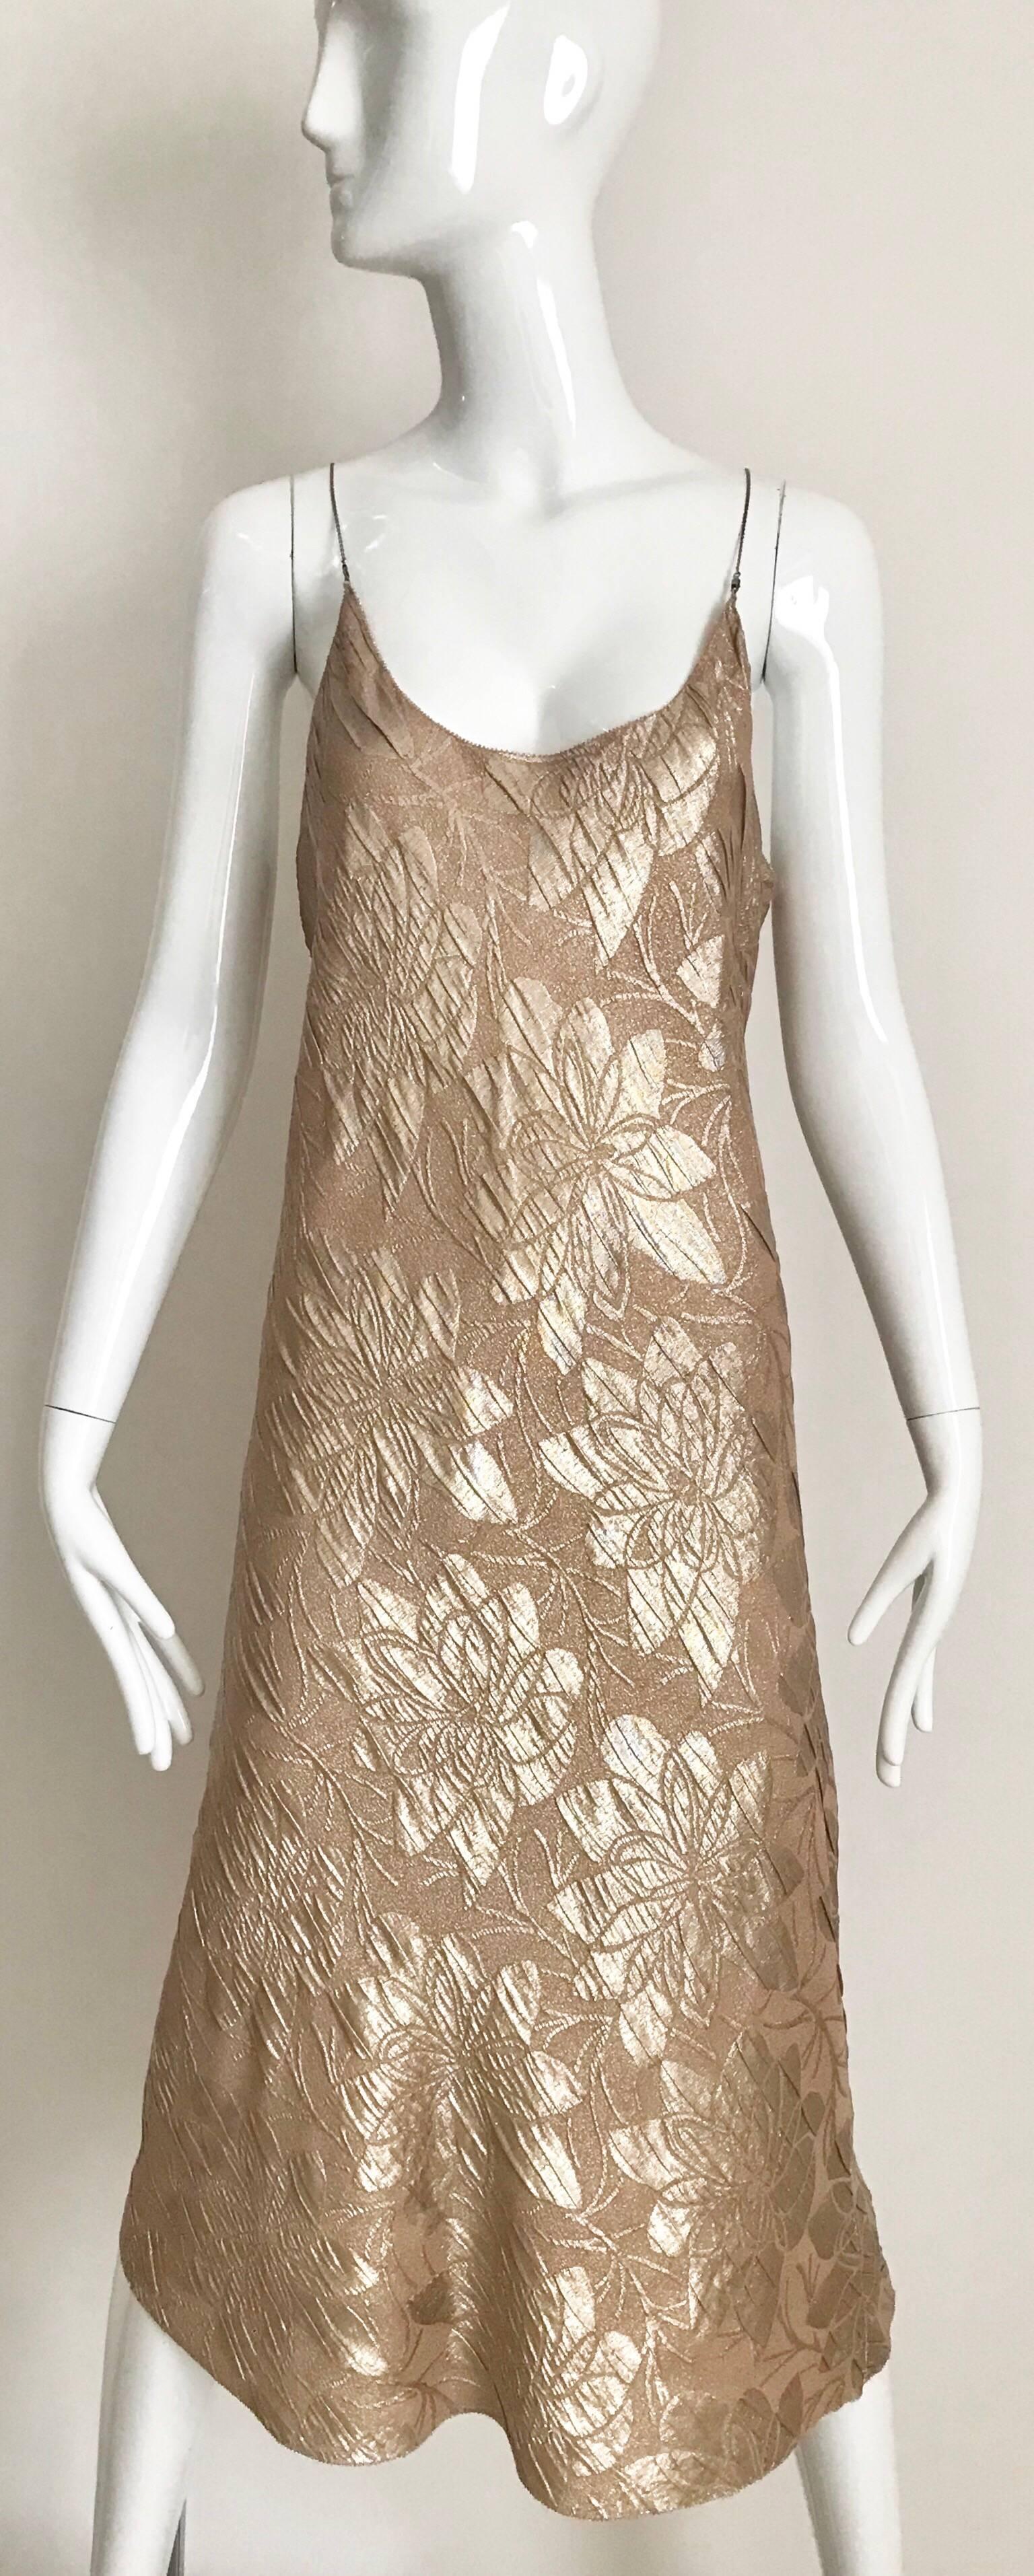 Vintage Jean Paul Gaultier metallic light brown bias cut silk jacquard slip dress with chain strap and silk cropped Jacket. Dress cut in bias.
Size: 4 or 6
Bust: 36 inches/ waist 36 inches/ Hip: 39 inches/ Dress length: 46 inches
Jacket measurement: